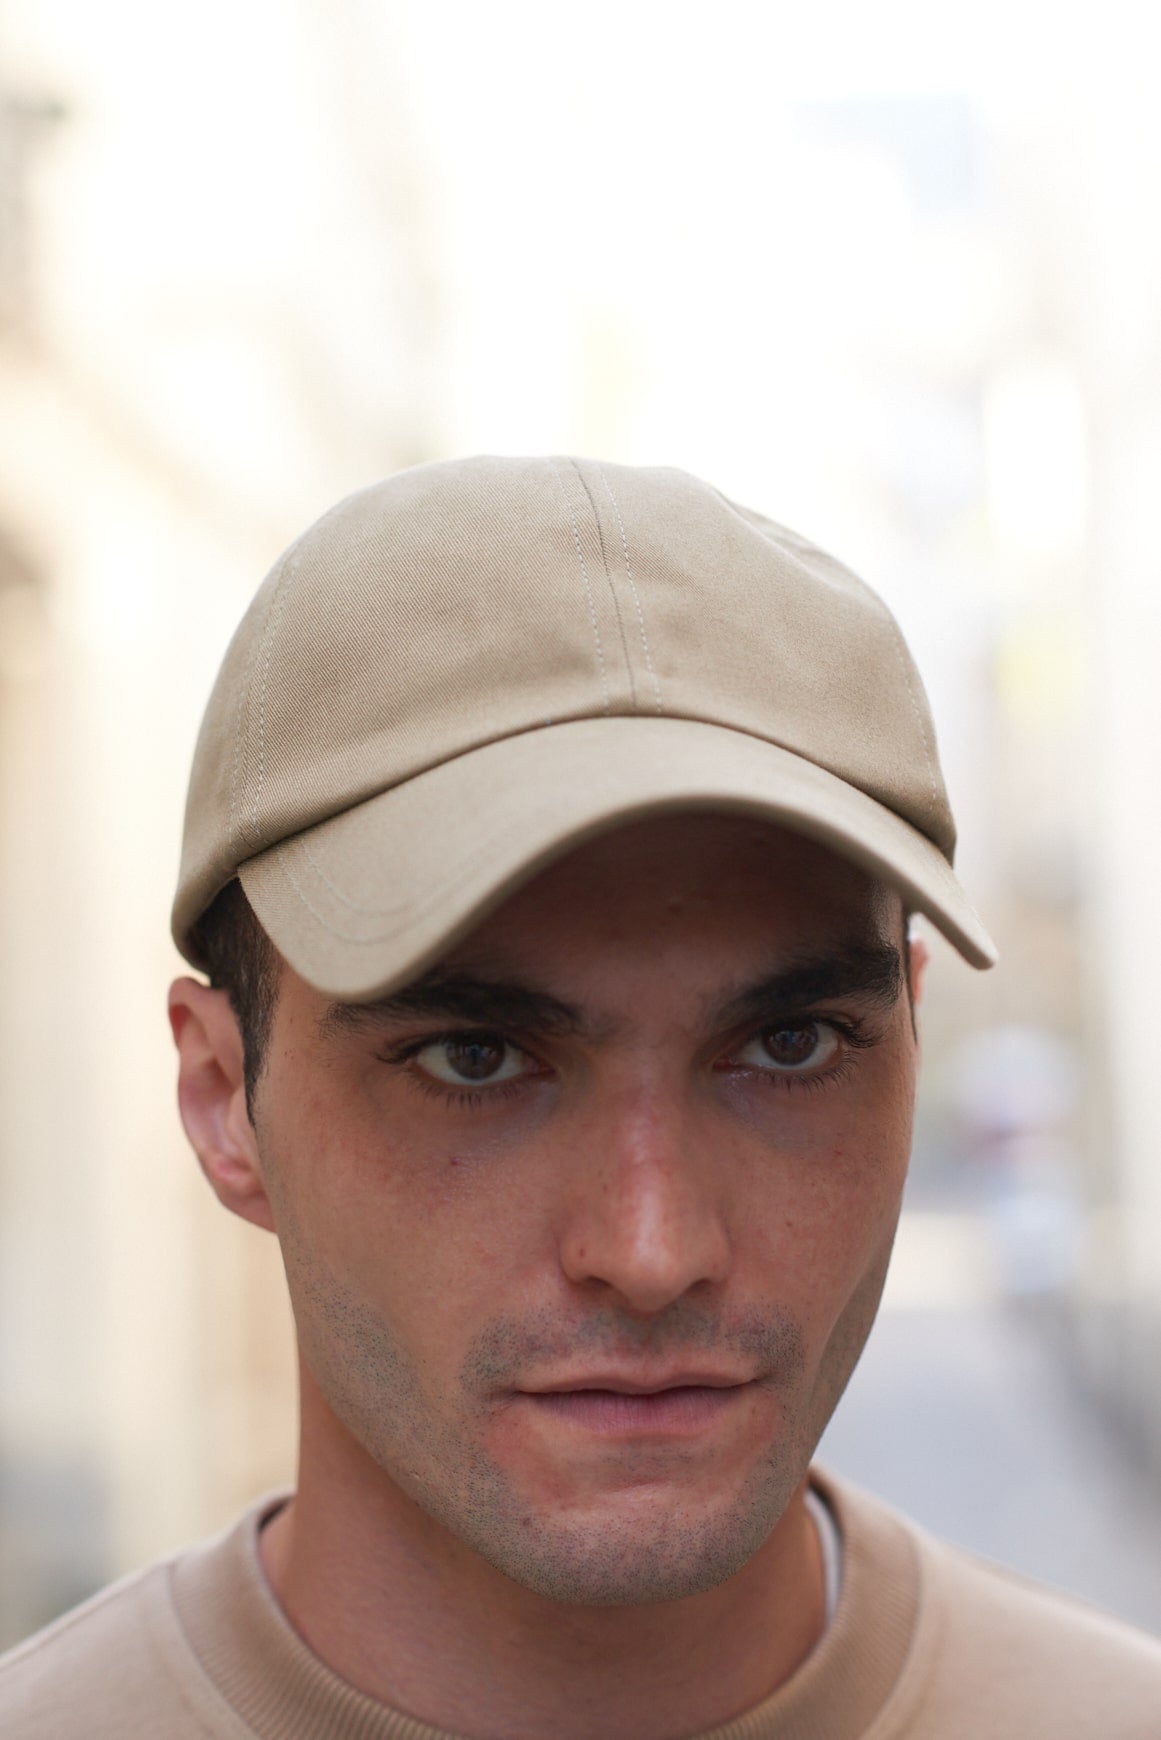 Casquette CHARLEY - Beige